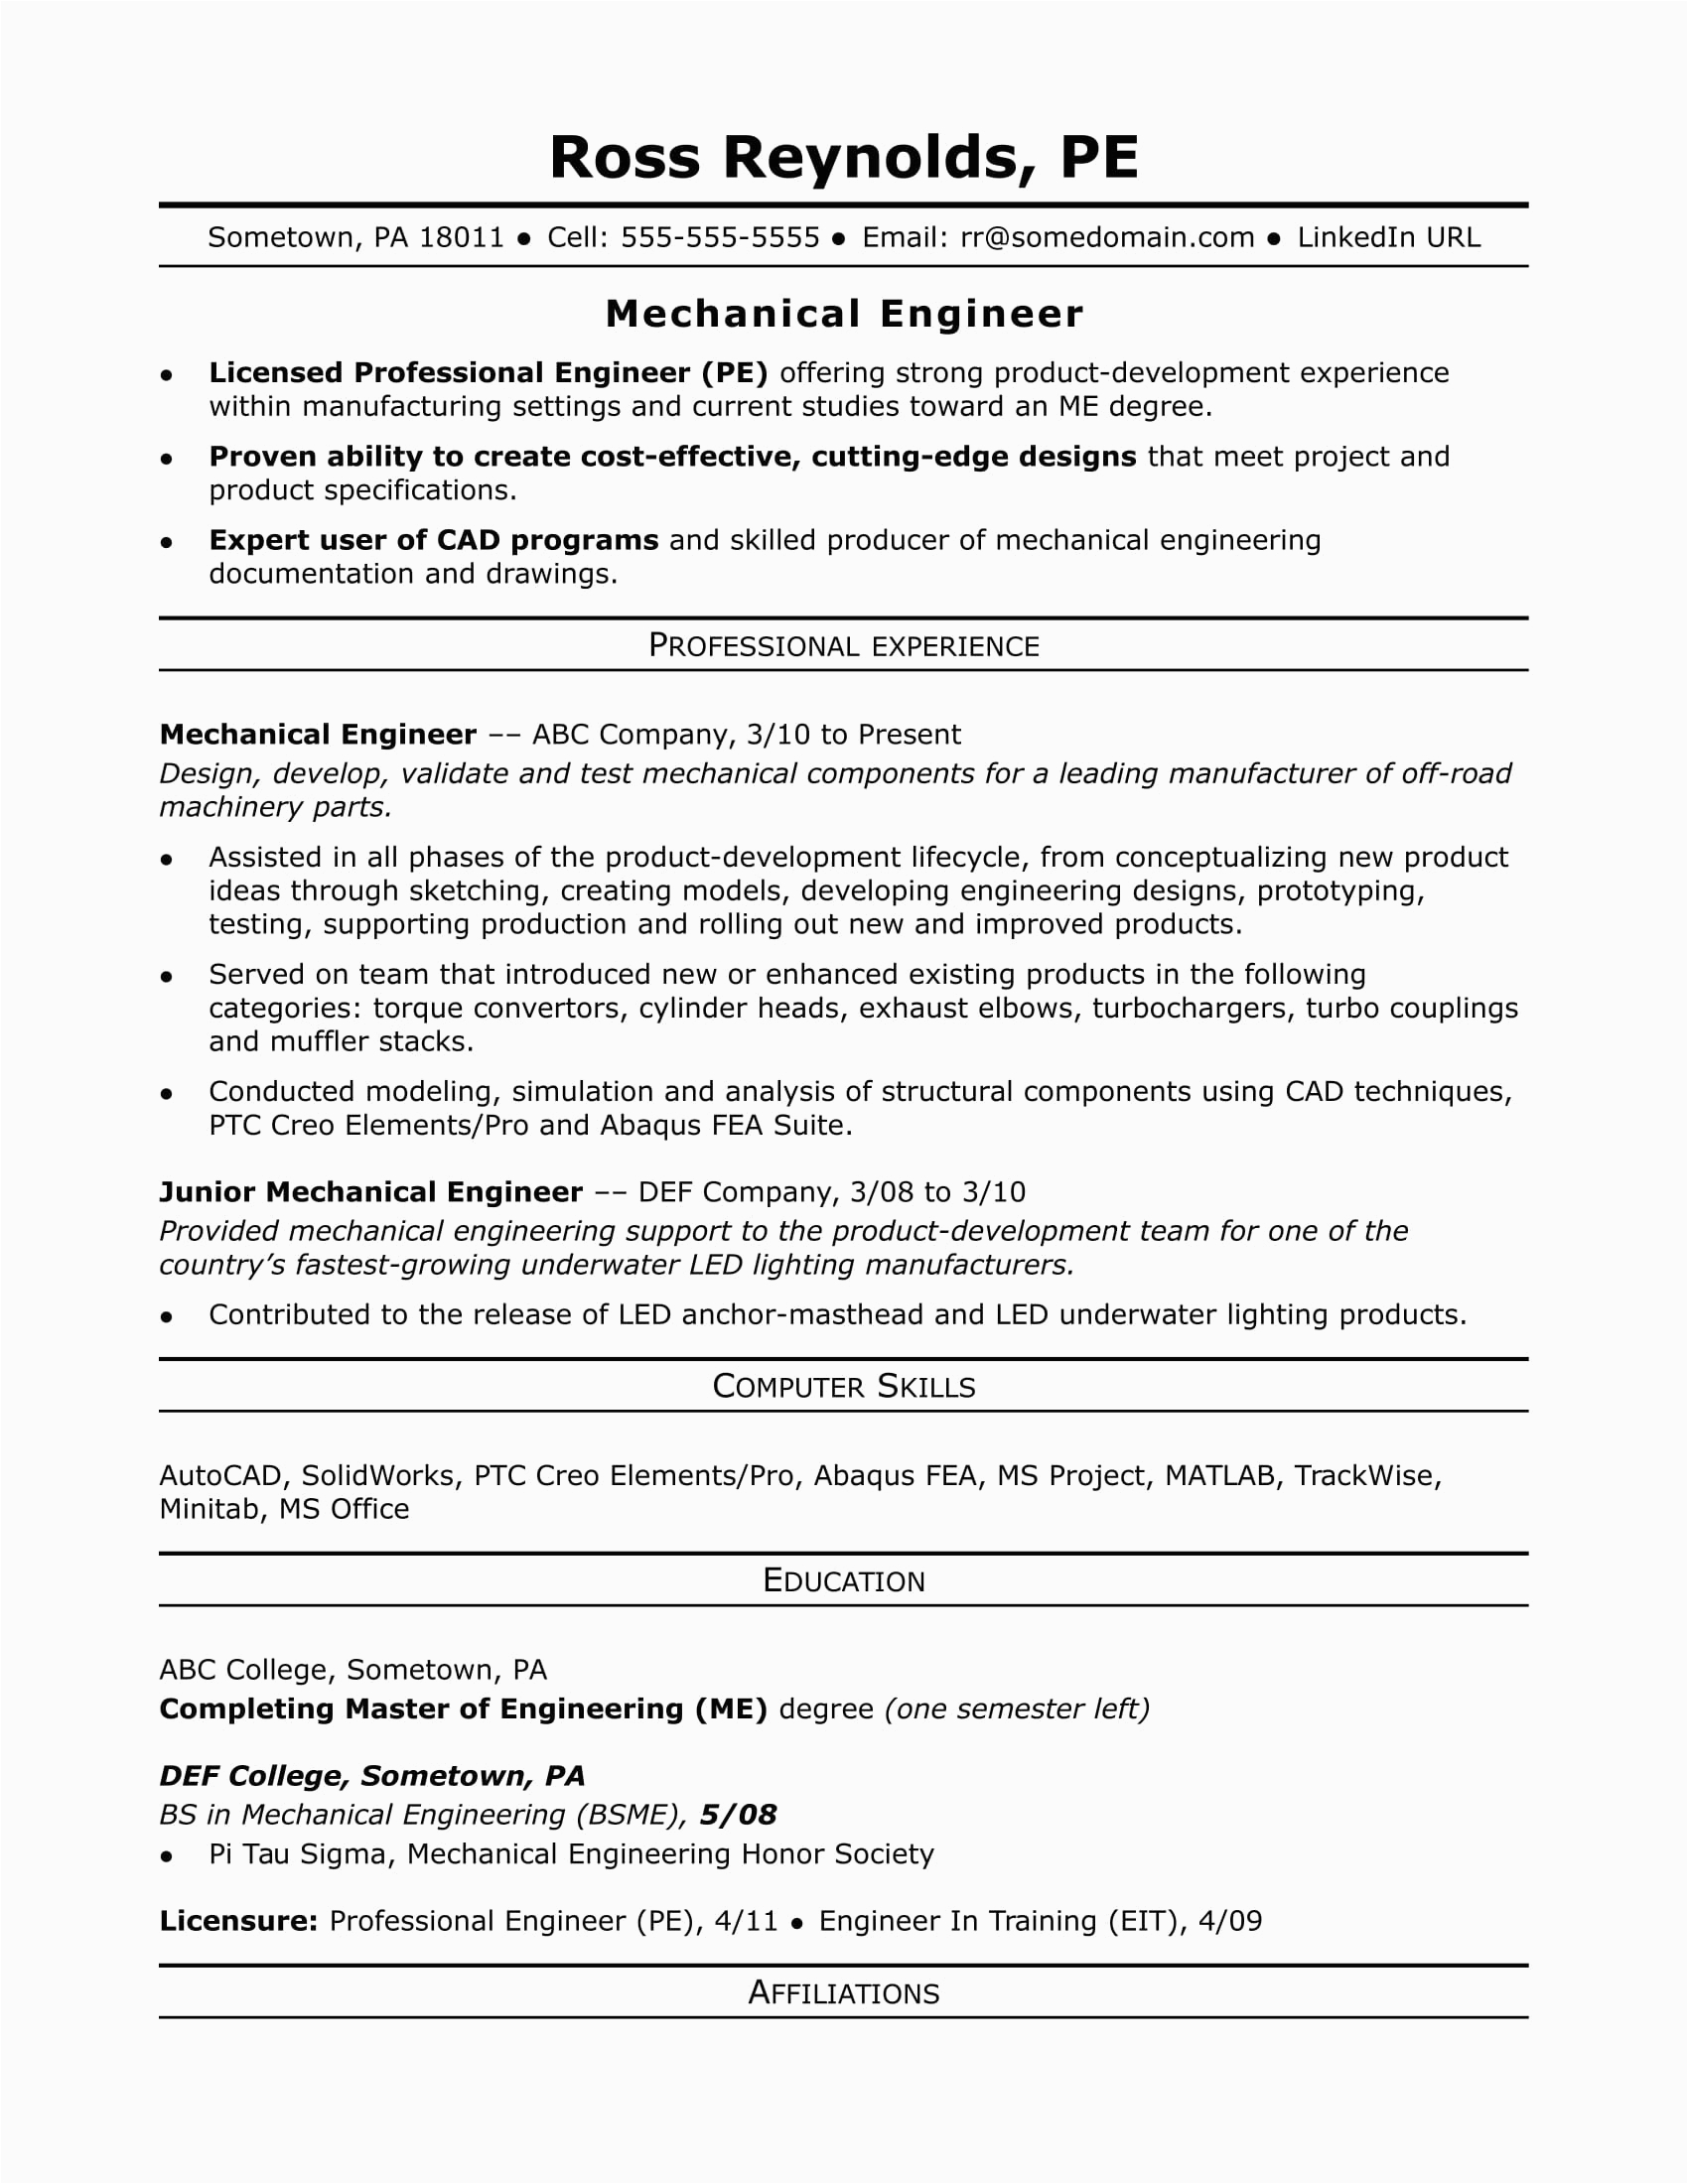 Sample Resume for Mechanical Engineer with Experience Sample Resume for A Midlevel Mechanical Engineer